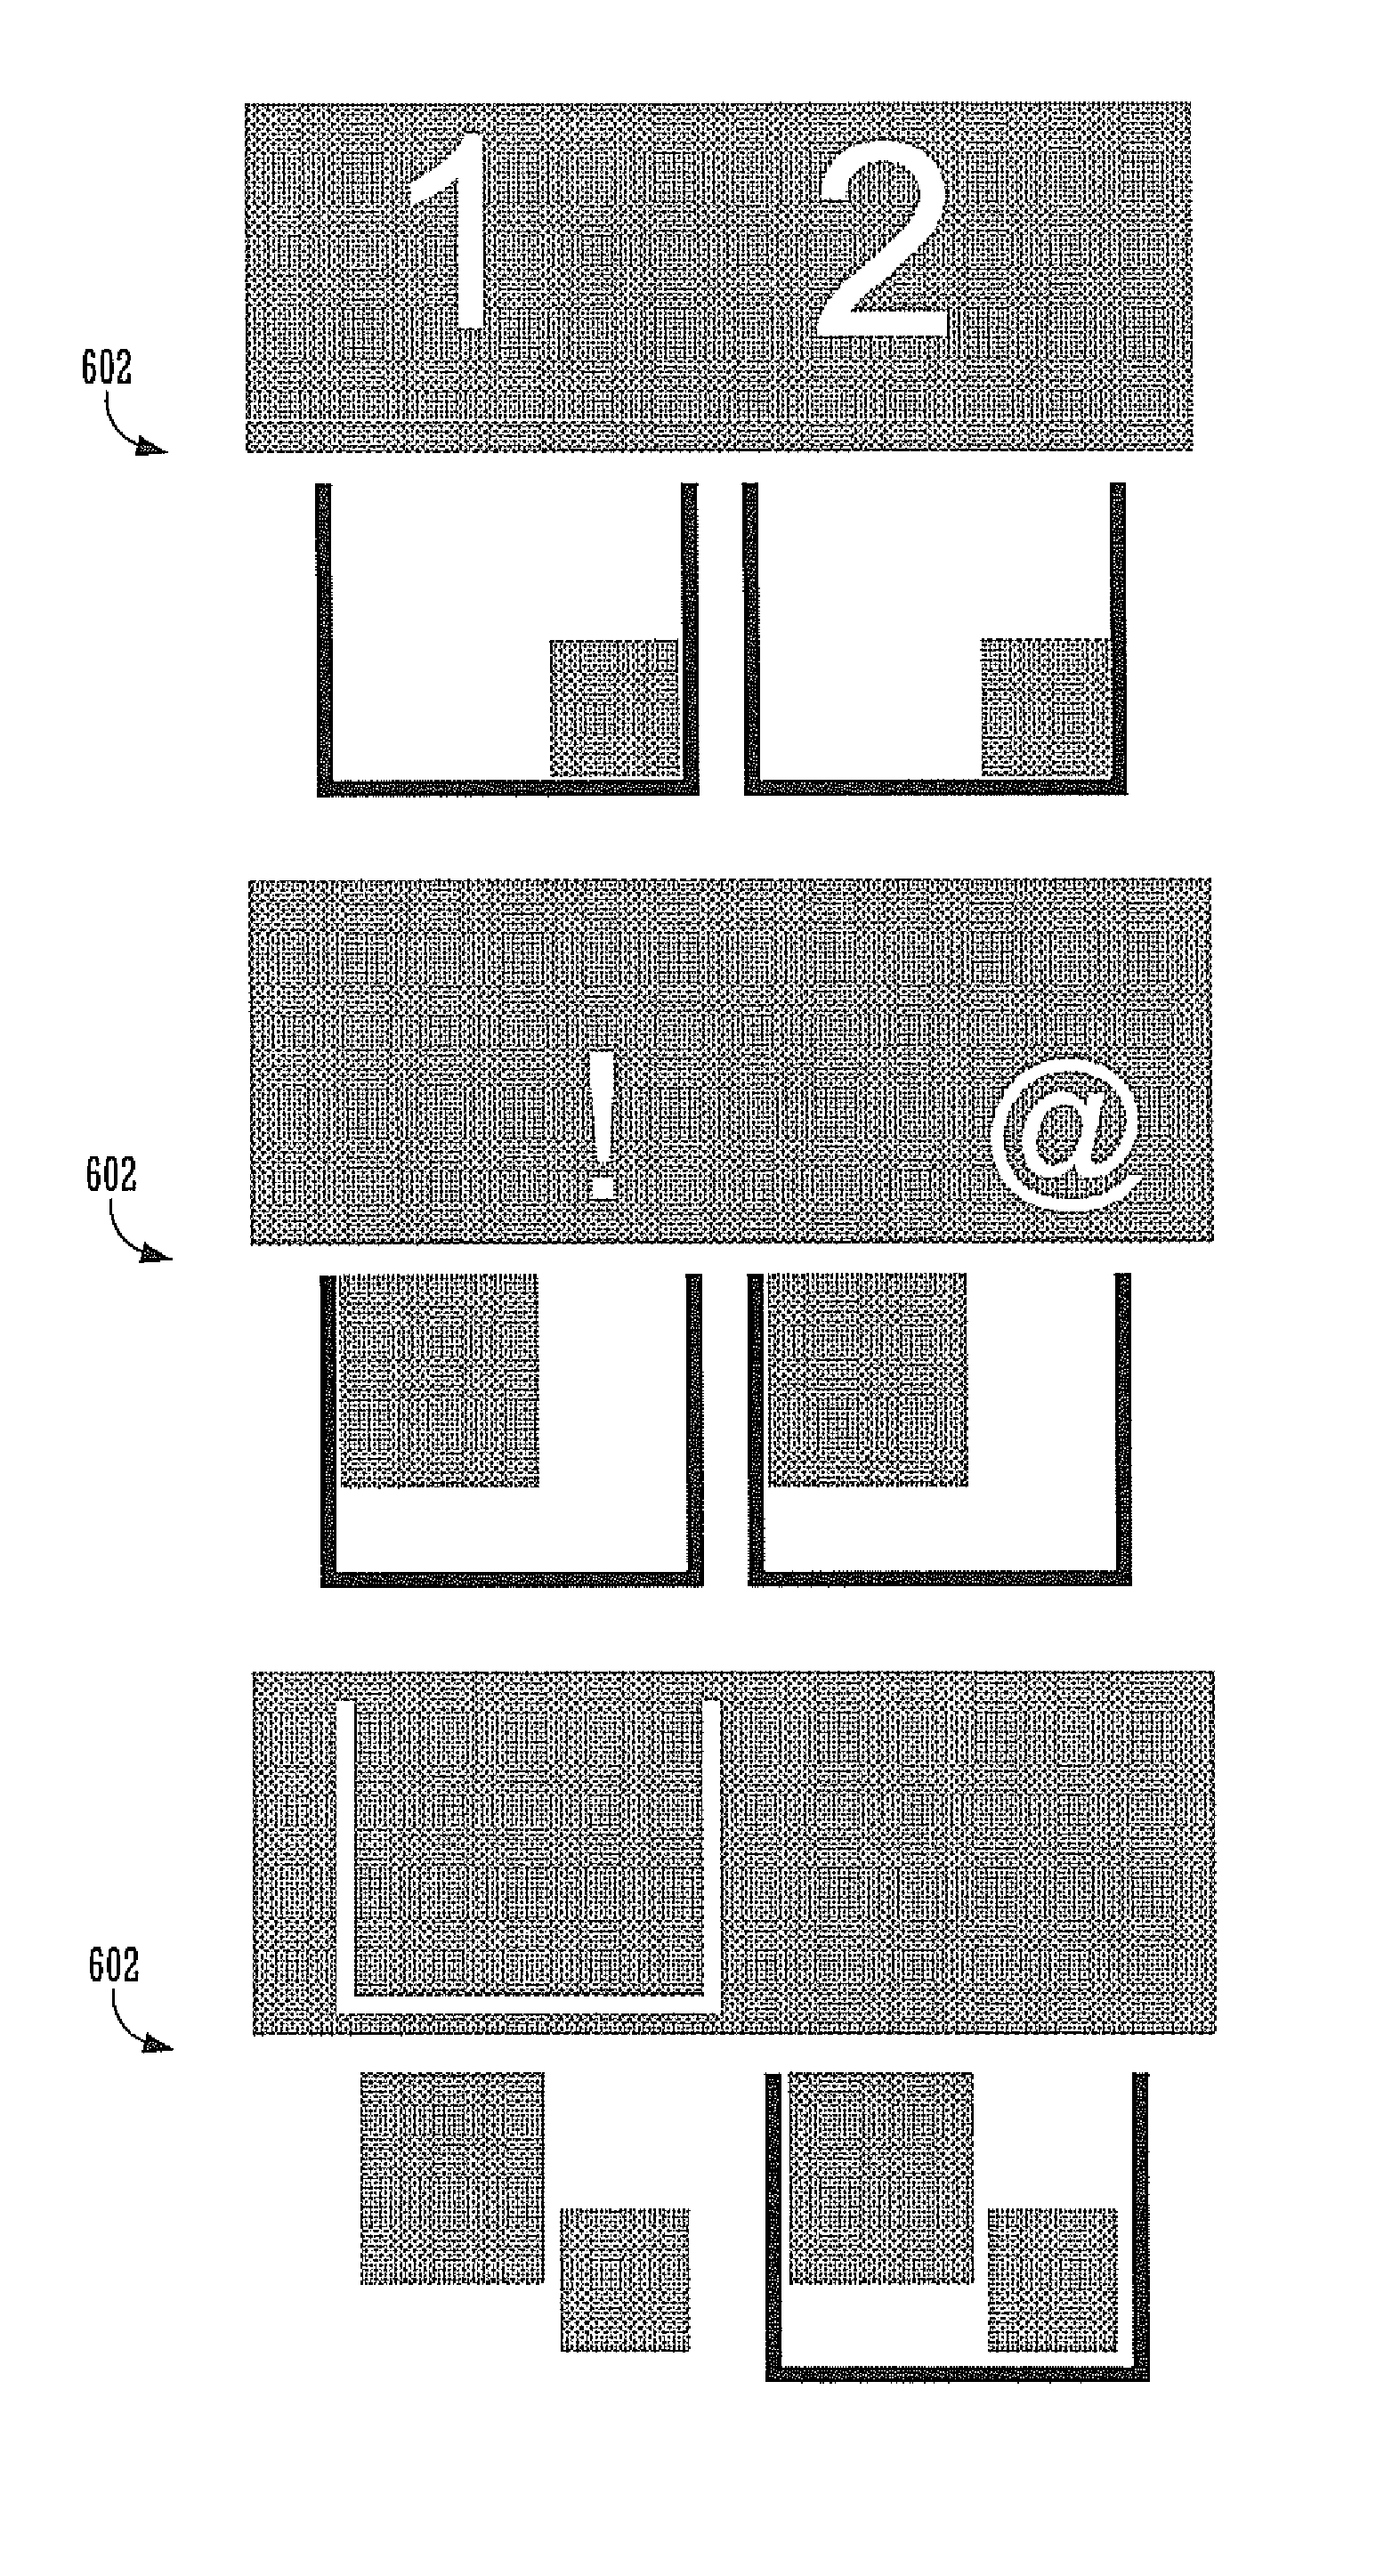 Versatile keyboard input and output device